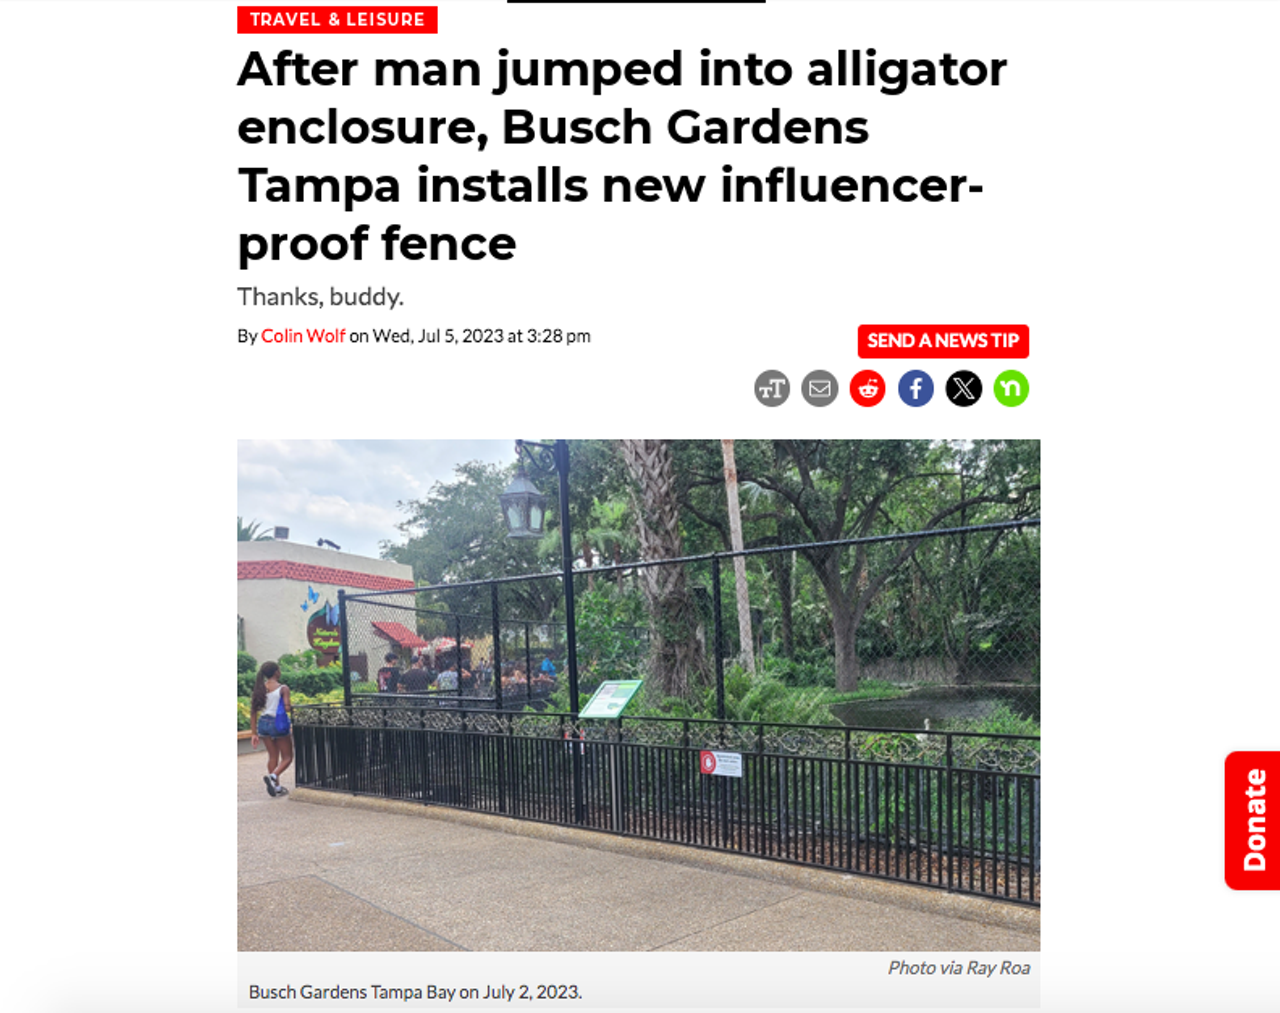 After a man attempted to go viral by jumping into Busch Gardens' American Alligator exhibit, the park installed a much taller fence that will certainly keep the influencers out. Read the full story here.